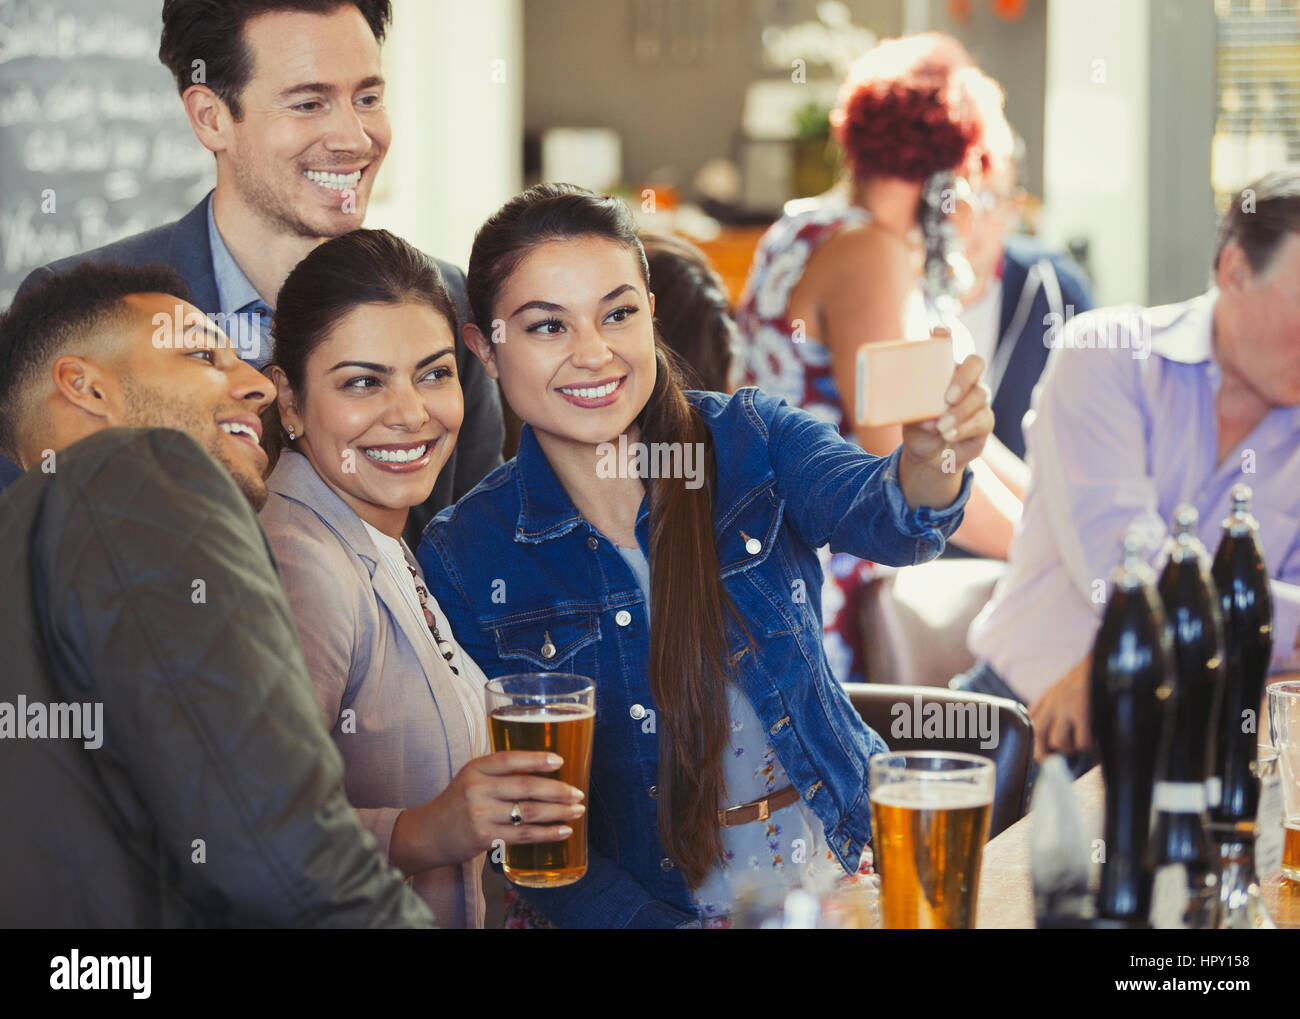 Playful friends drinking beer and taking selfie with camera phone at bar Stock Photo